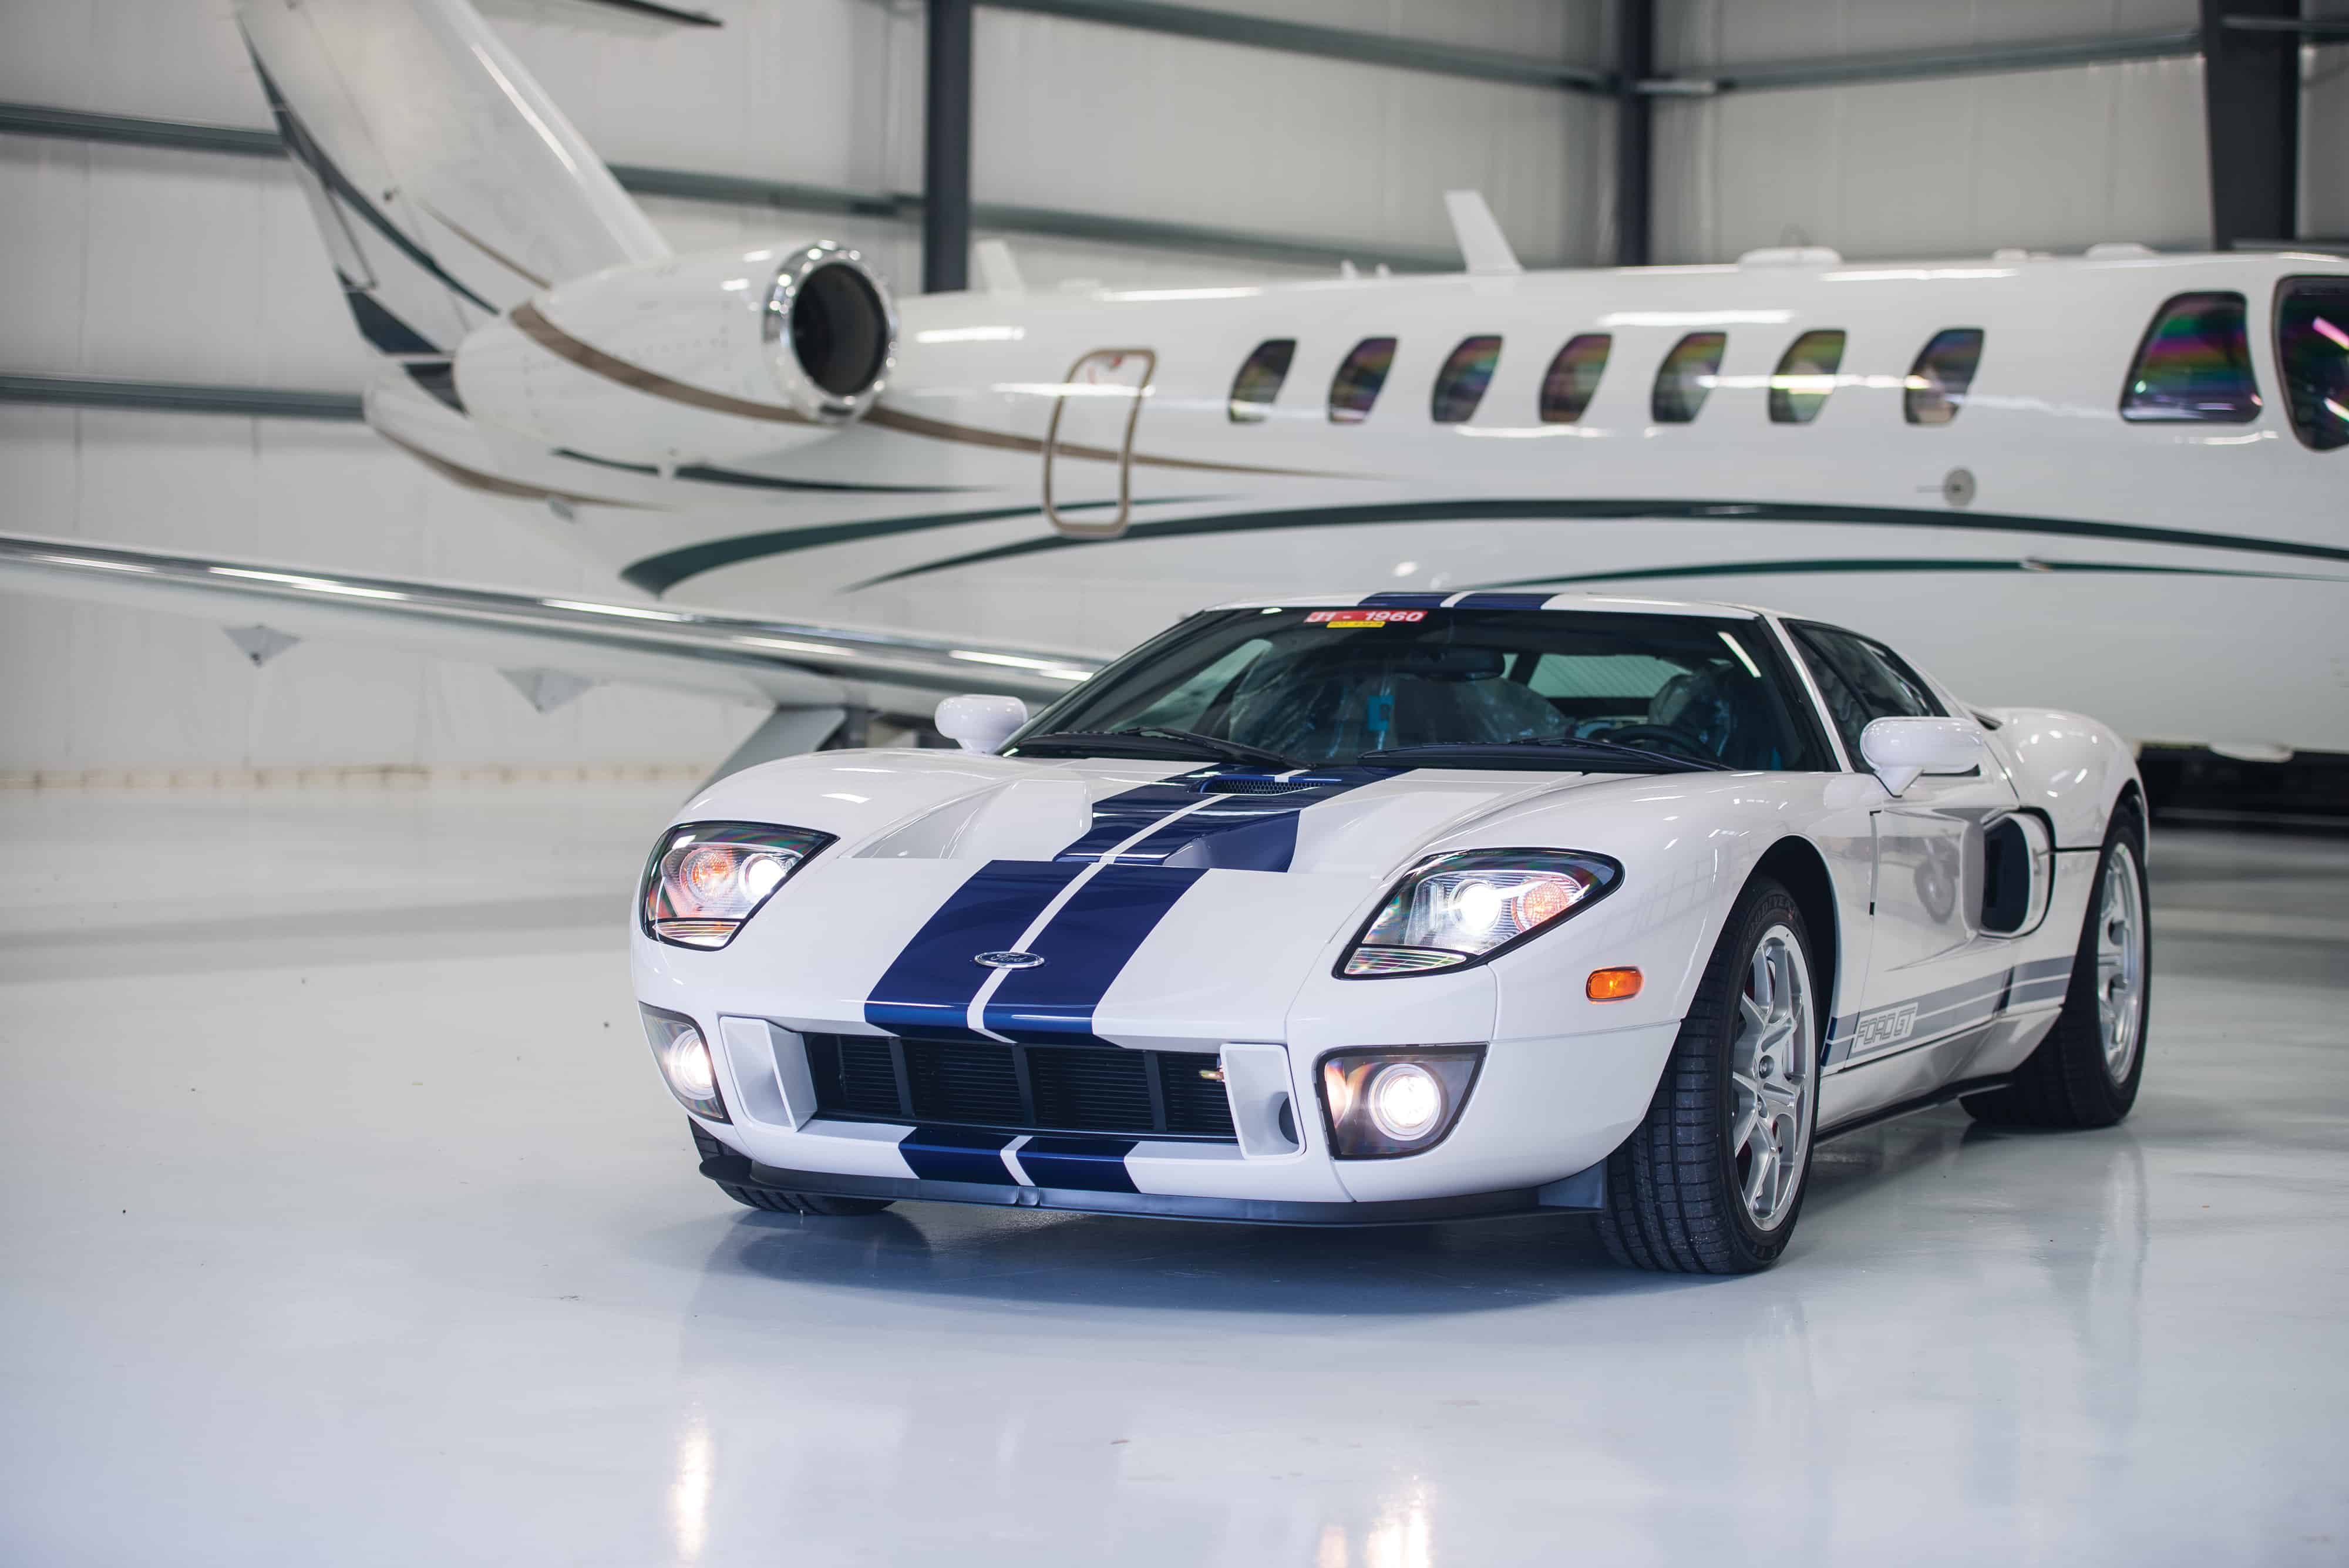 10-mile Ford GT to be offered at RM Sotheby’s Fort Lauderdale sale